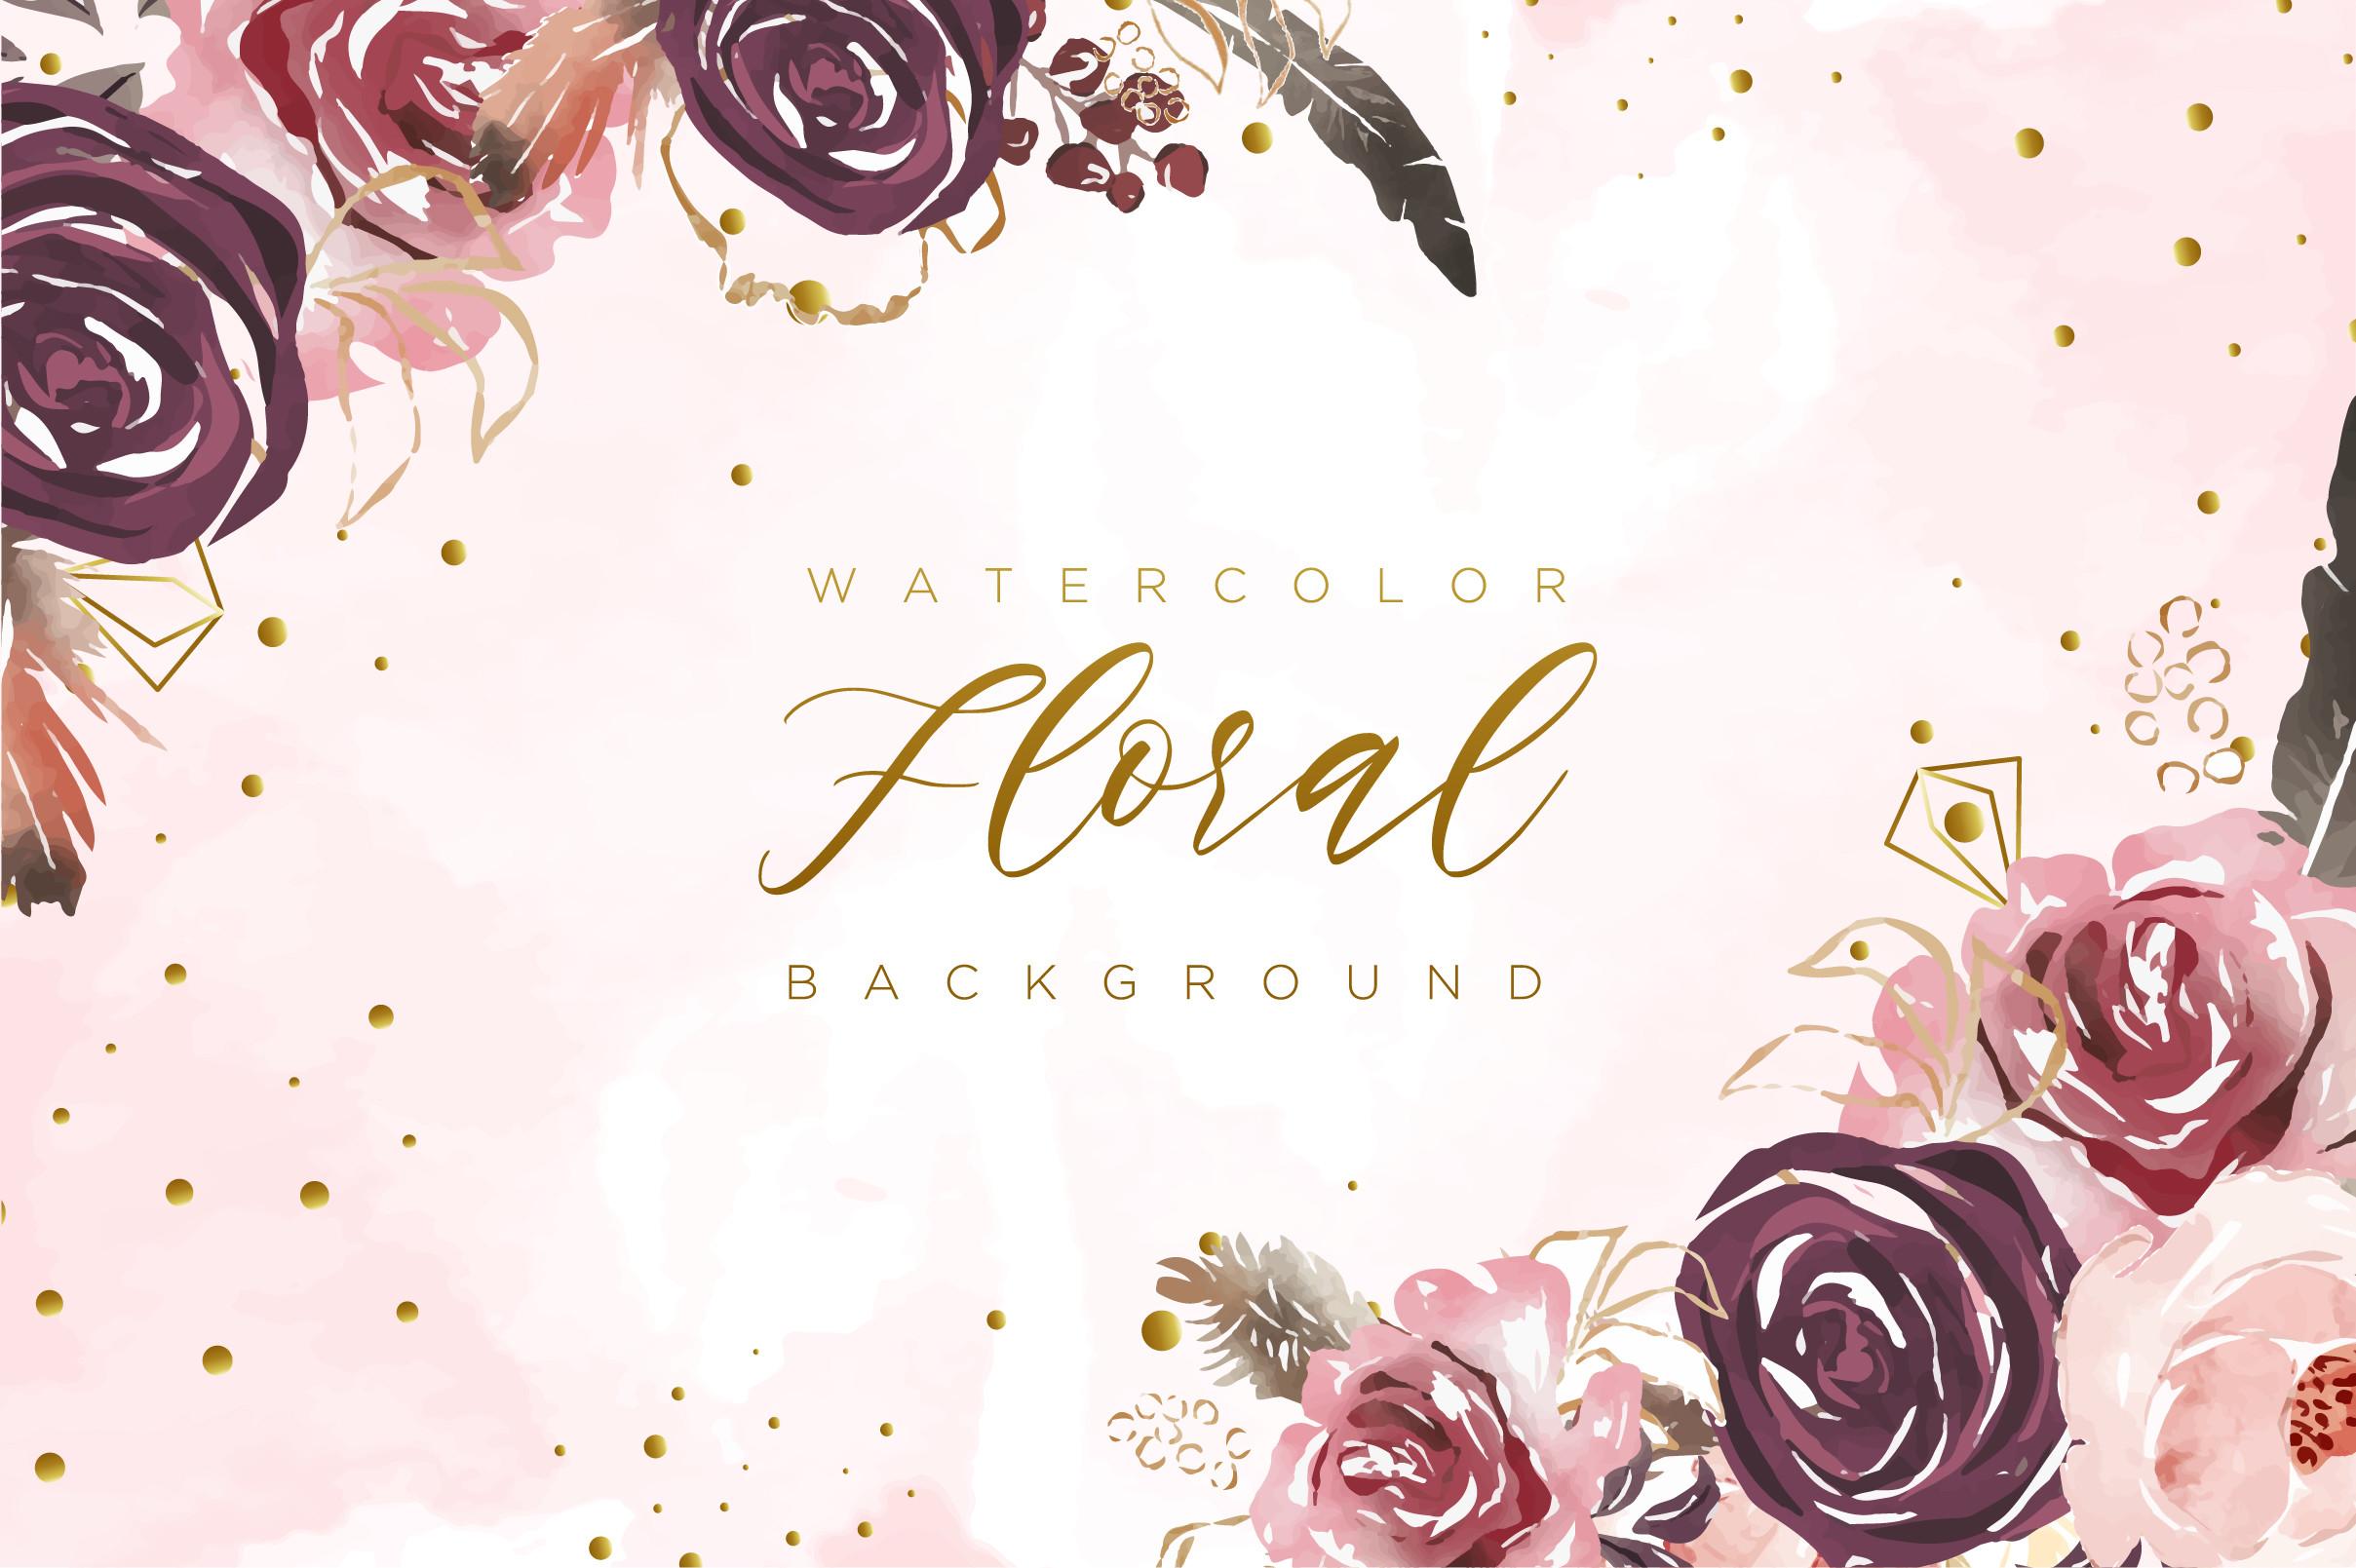 Beautiful Watercolor Floral Background